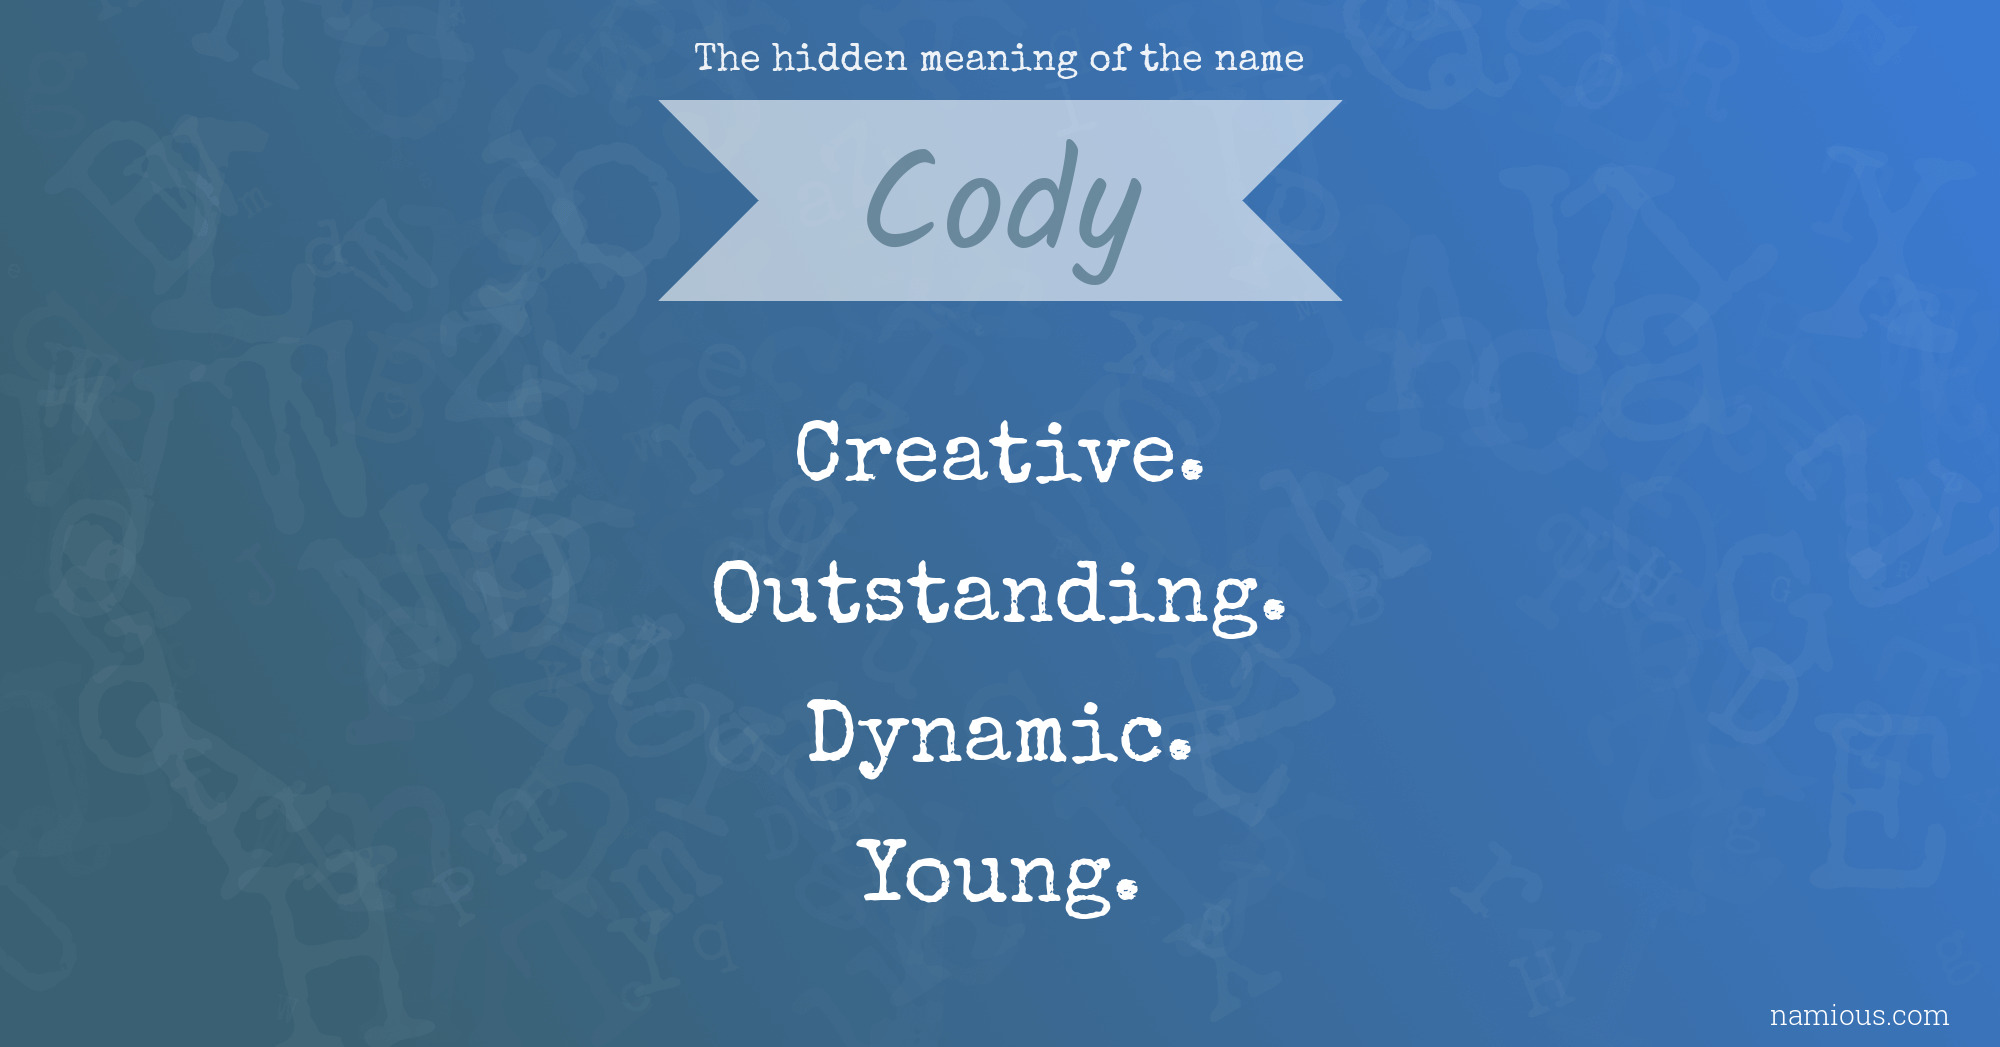 The hidden meaning of the name Cody